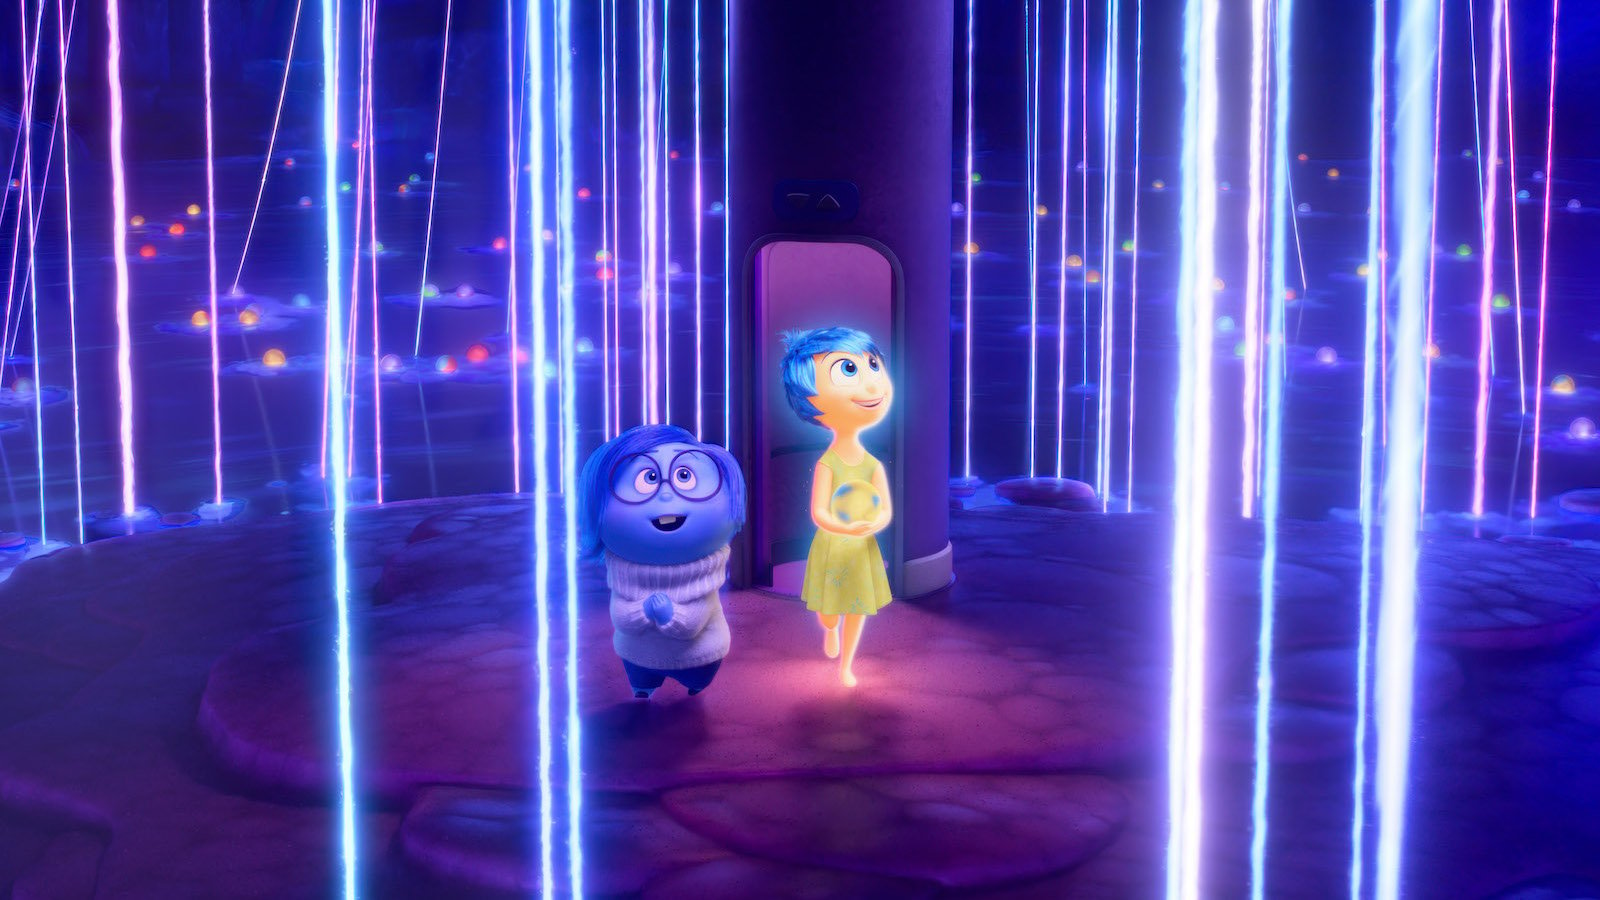 Two animated characters, one blue with glasses and one yellow with blue hair walk through a purple and blue fantasy world with light beams, looking up in wonder and awe